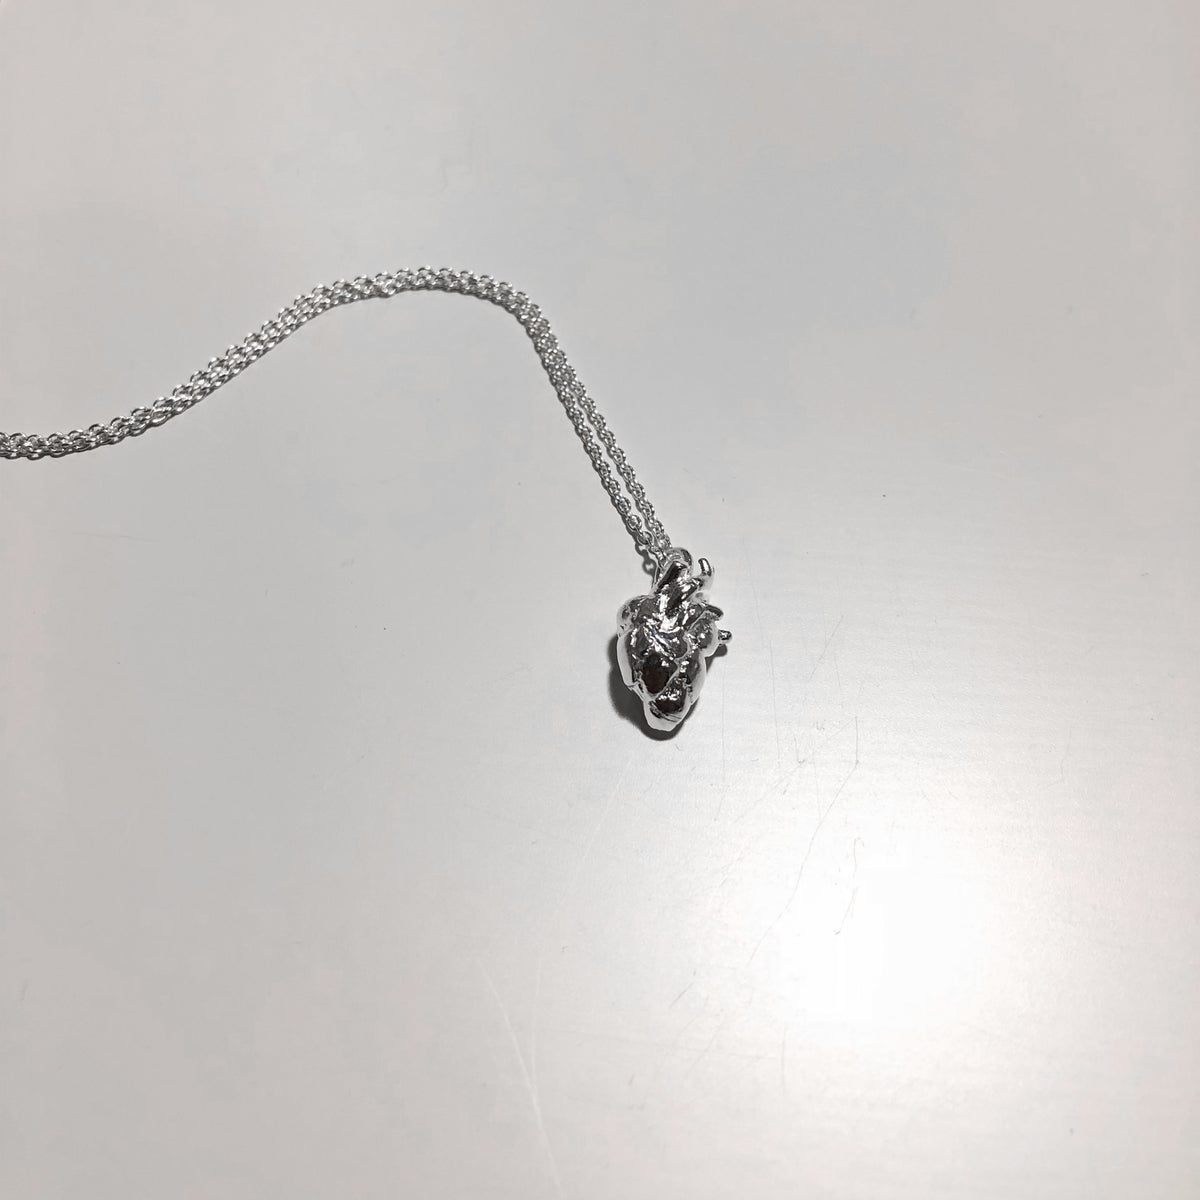 VIKA jewels ONLY LOVE ORGANIC HEART NECKLACE The pendant is a small organic heart 1CM long Timothée chalamet  Hangs on a 40CM or 50CM or 60CM long box chain Handmade in Bali from recycled sterling silver